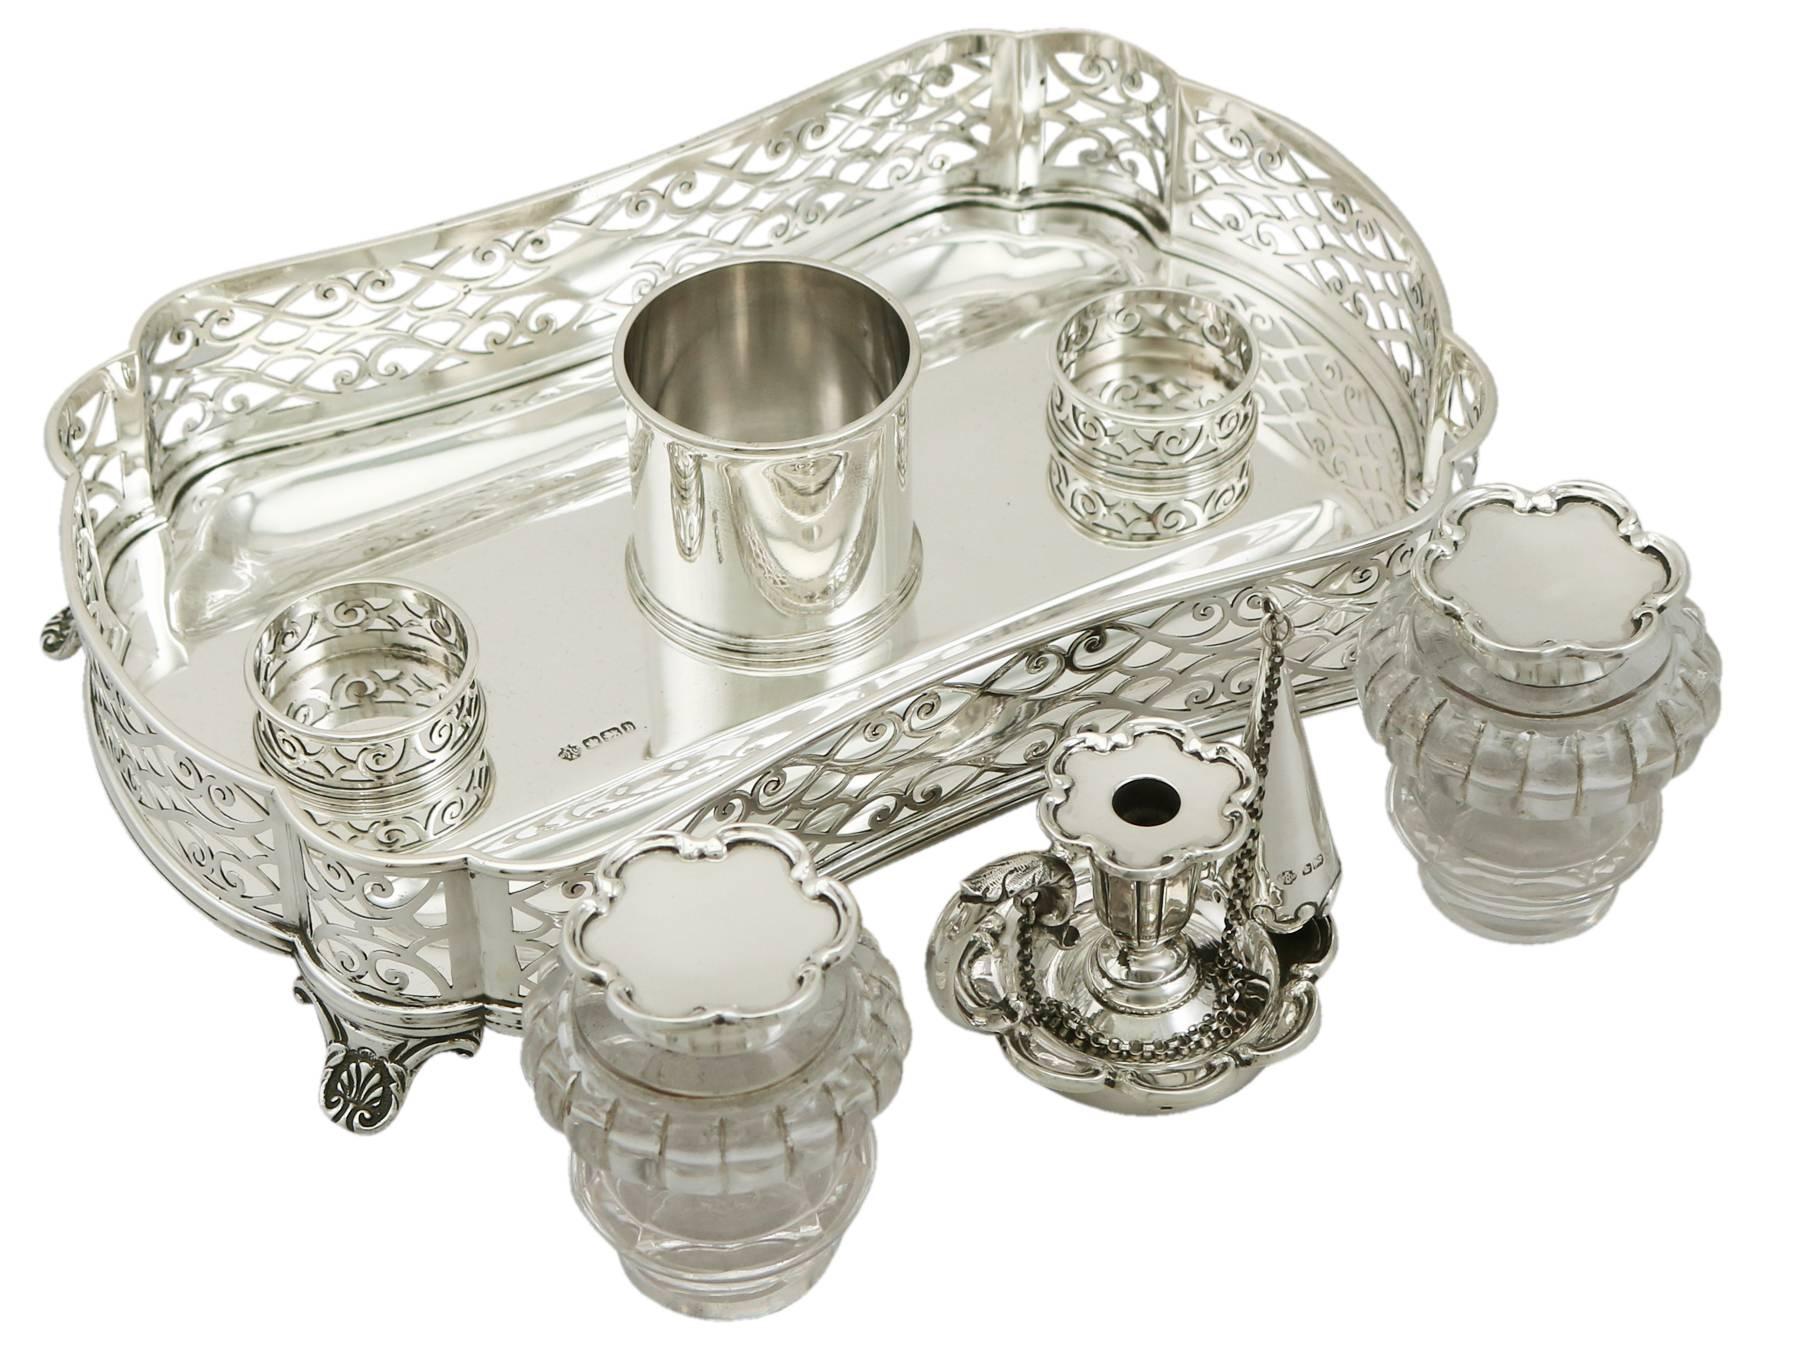 20th Century Sterling Silver Gallery Inkstand by William Hutton & Sons, Antique Victorian